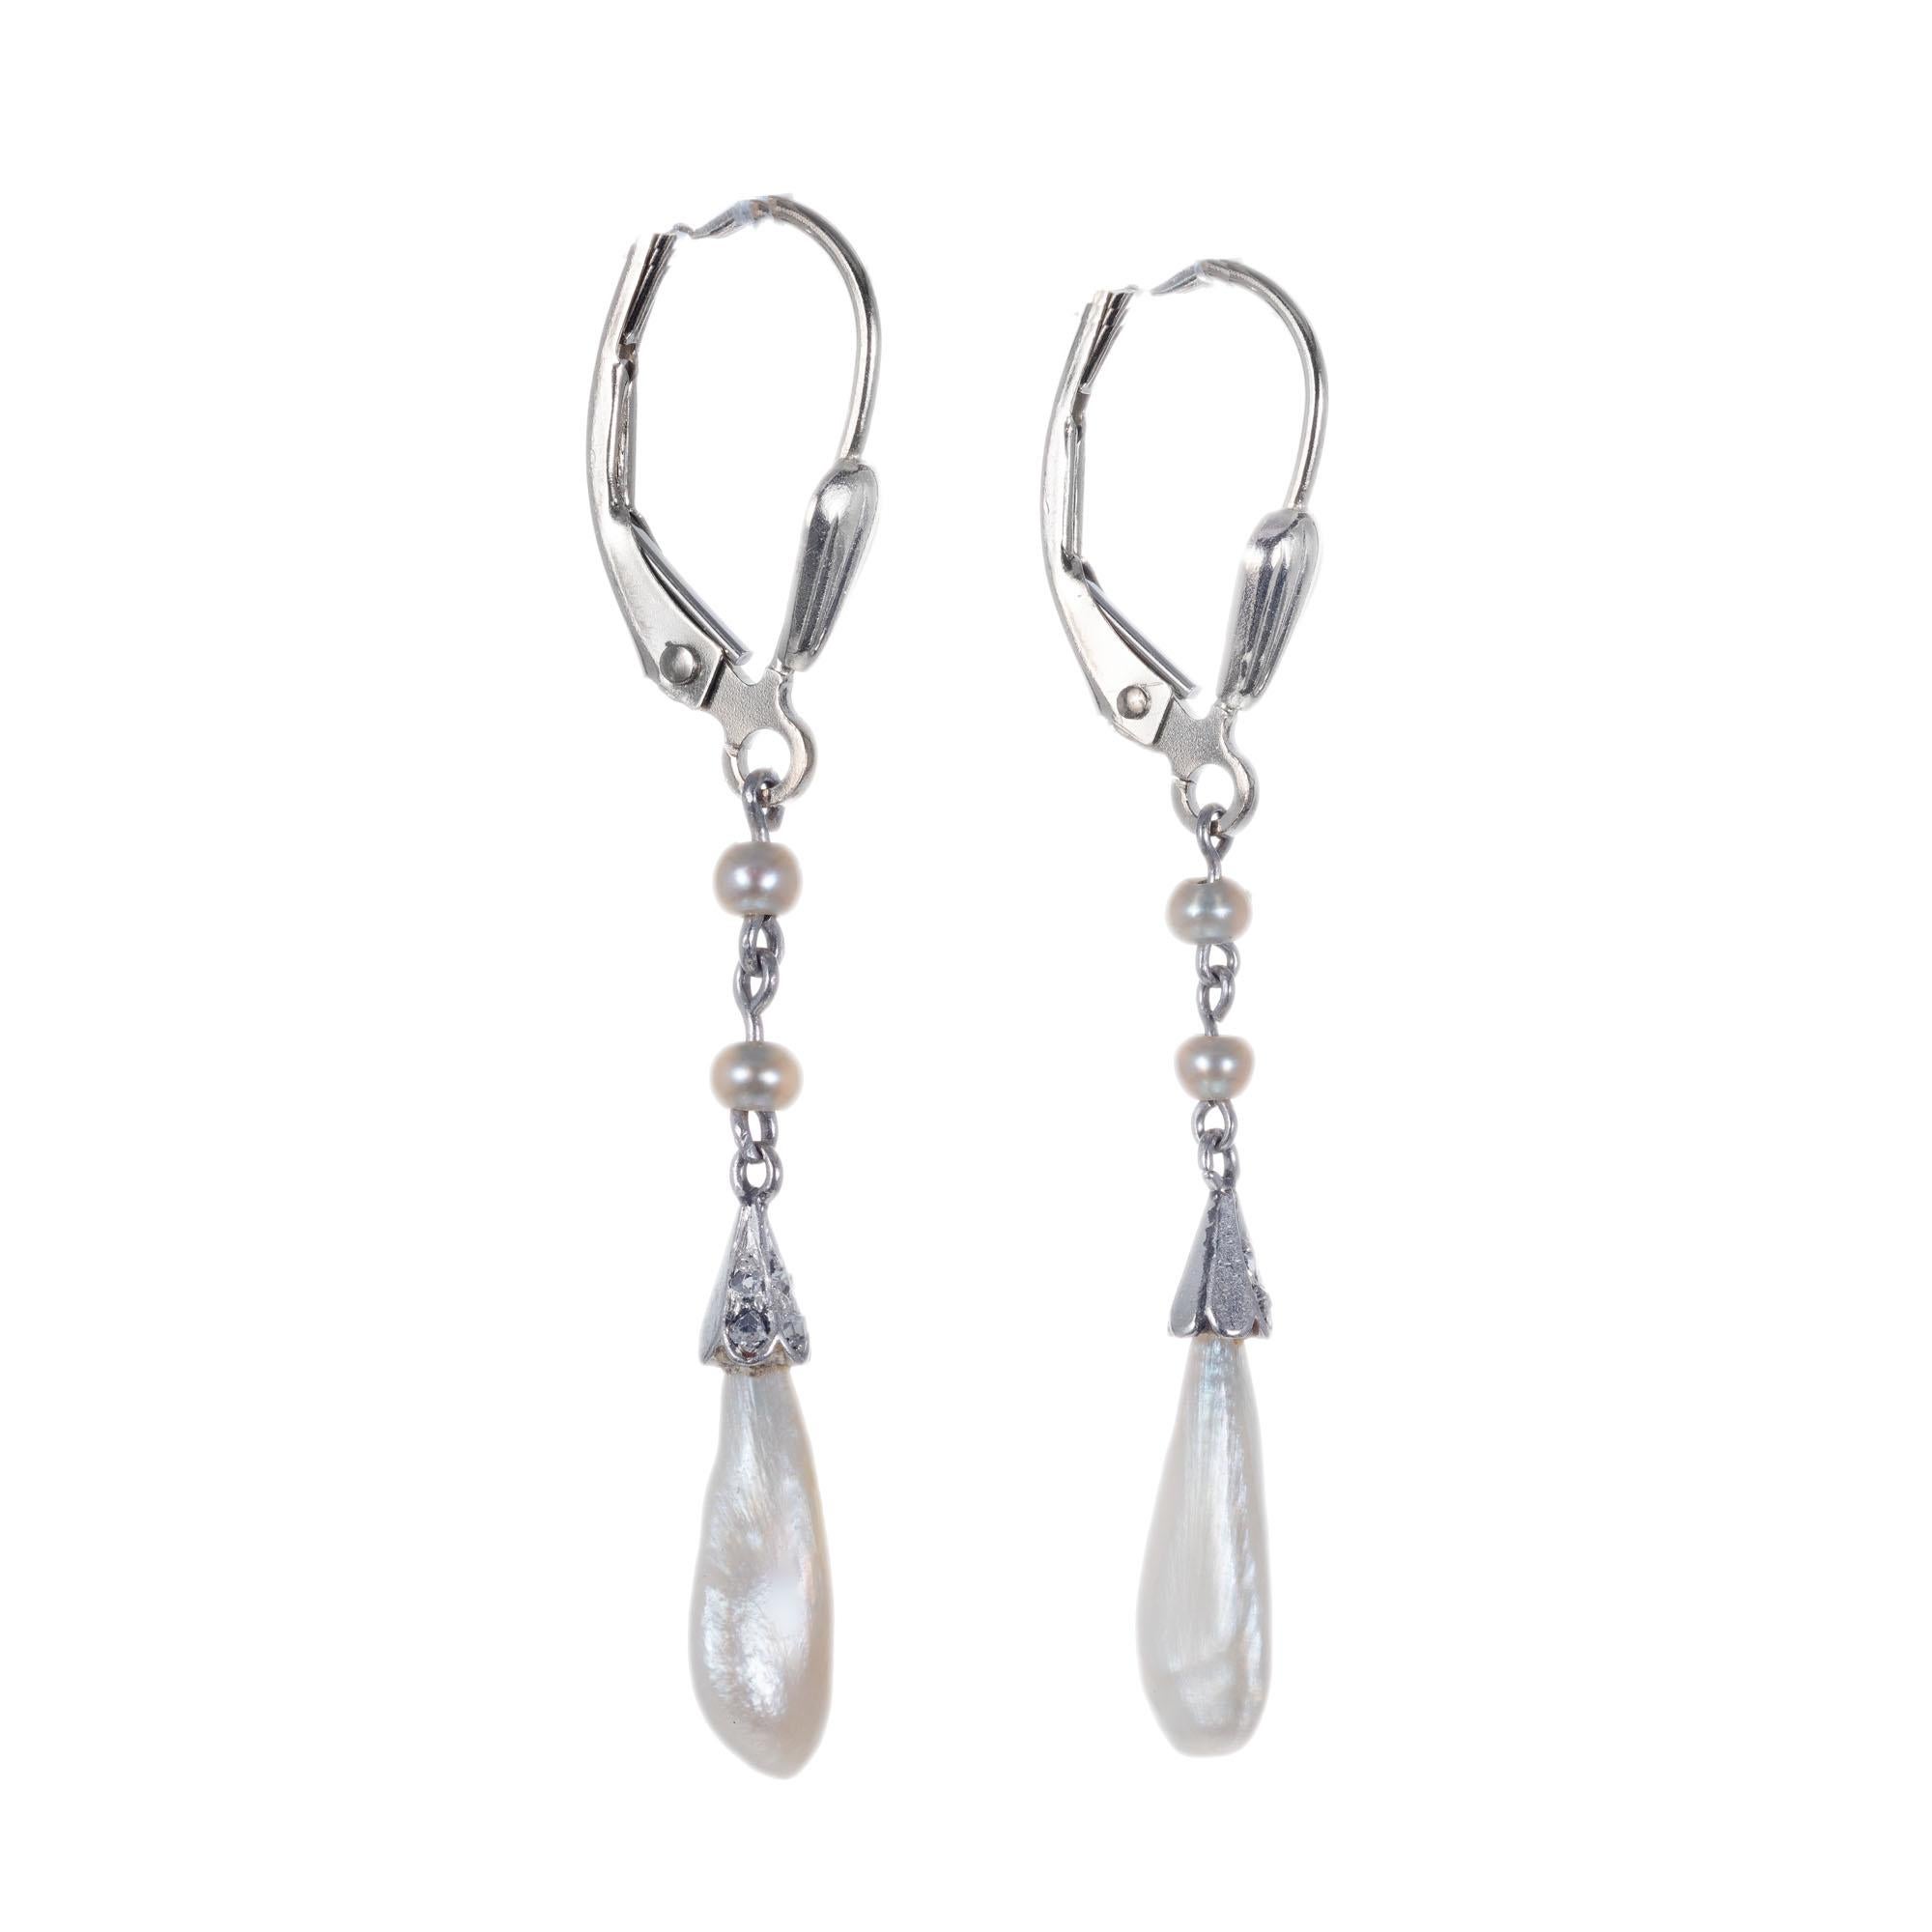 Early 1900's Antique pearl and diamond dangle drop earrings. GIA certified natural freshwater pearls accented with 12 old mine cut diamonds. 14k white gold with Euro tops. 

2 natural white baroque freshwater pearls GIA Certificate # 2205901432
4